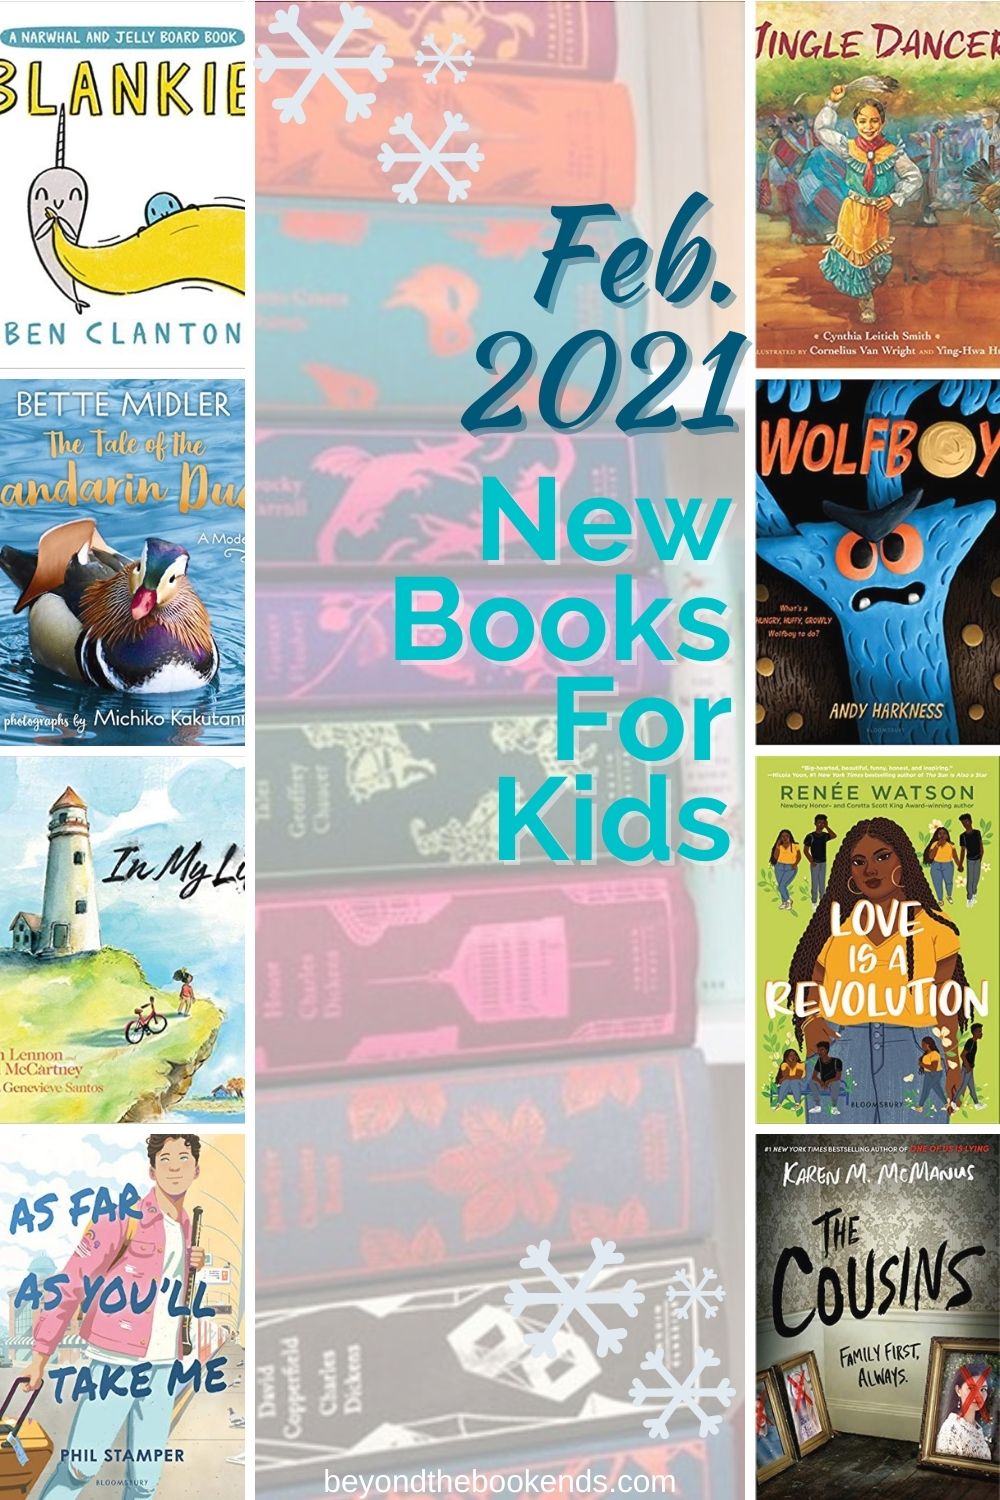 Incredible new children's books coming February 2021 from beloved writers and debut authors.